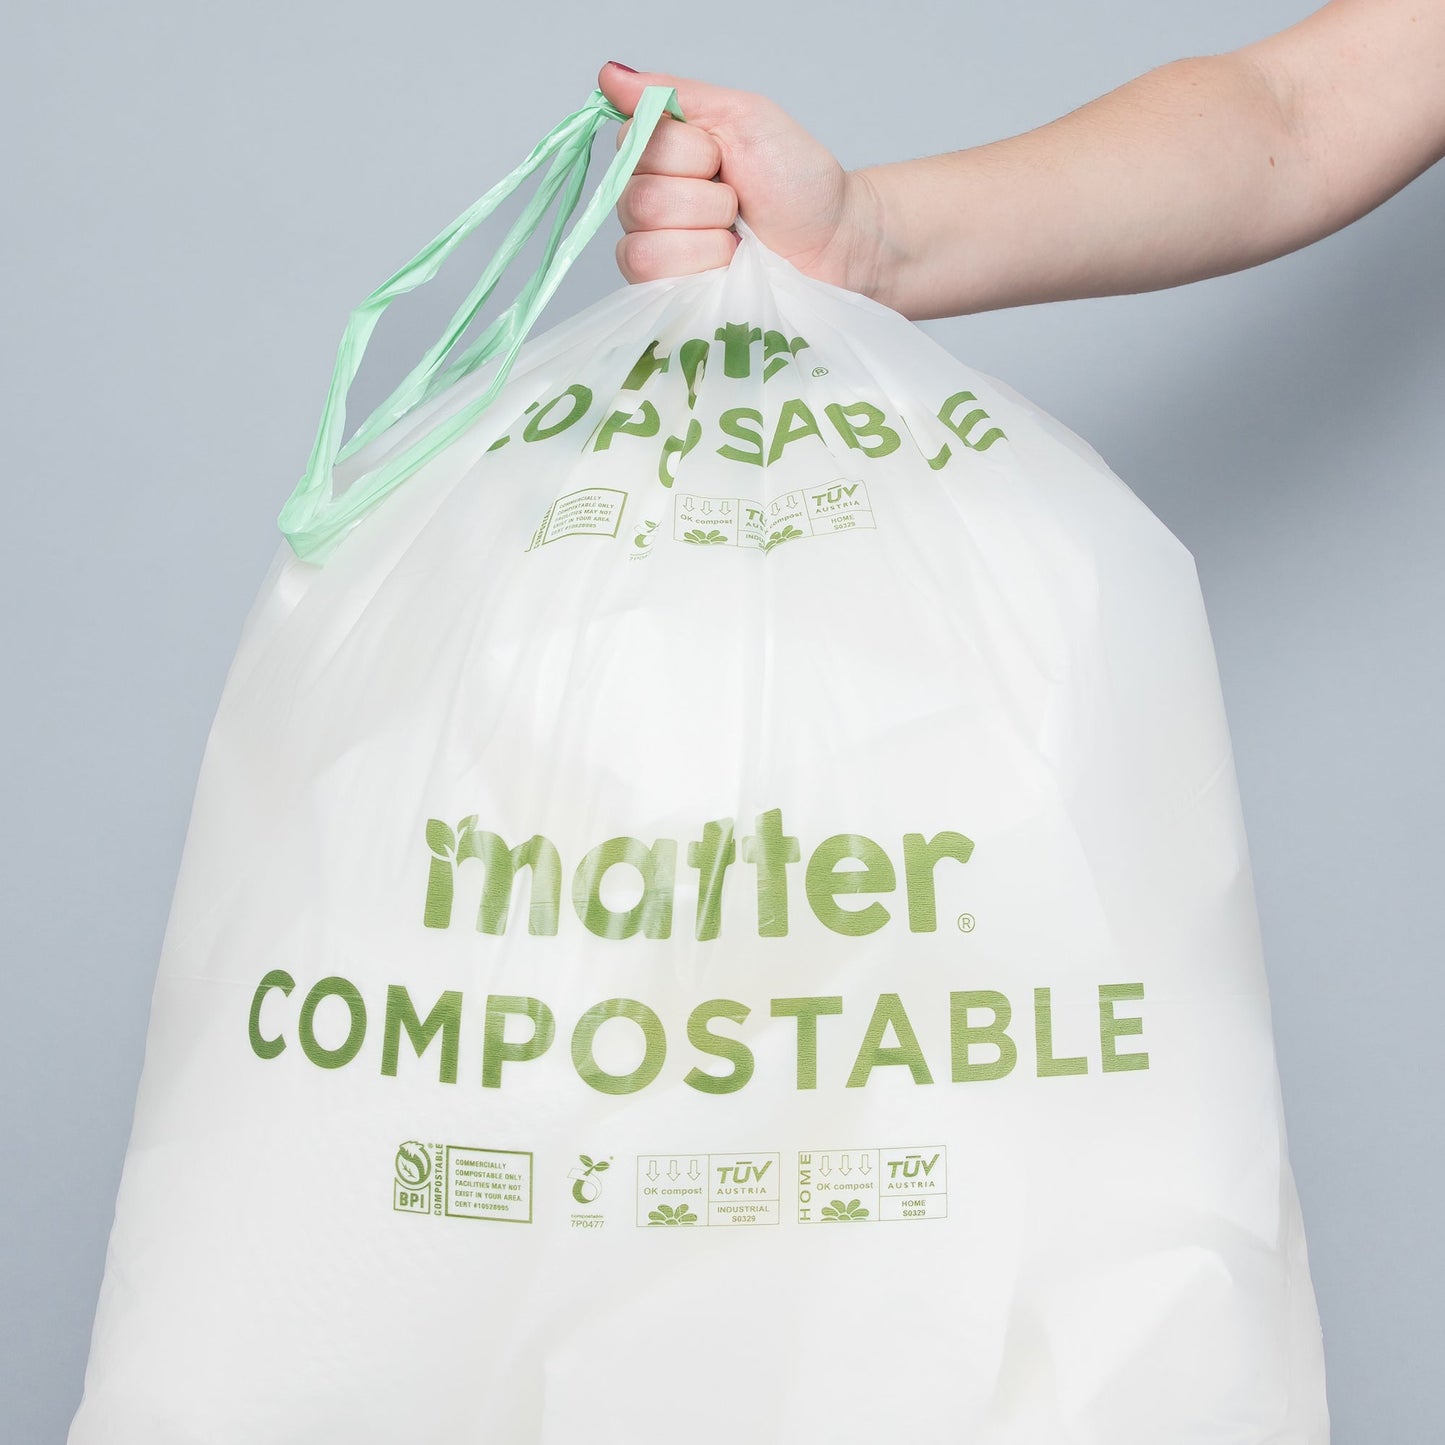 Matter Compostable Universal Tall Kitchen 13-Gallon Bags - 12 Count